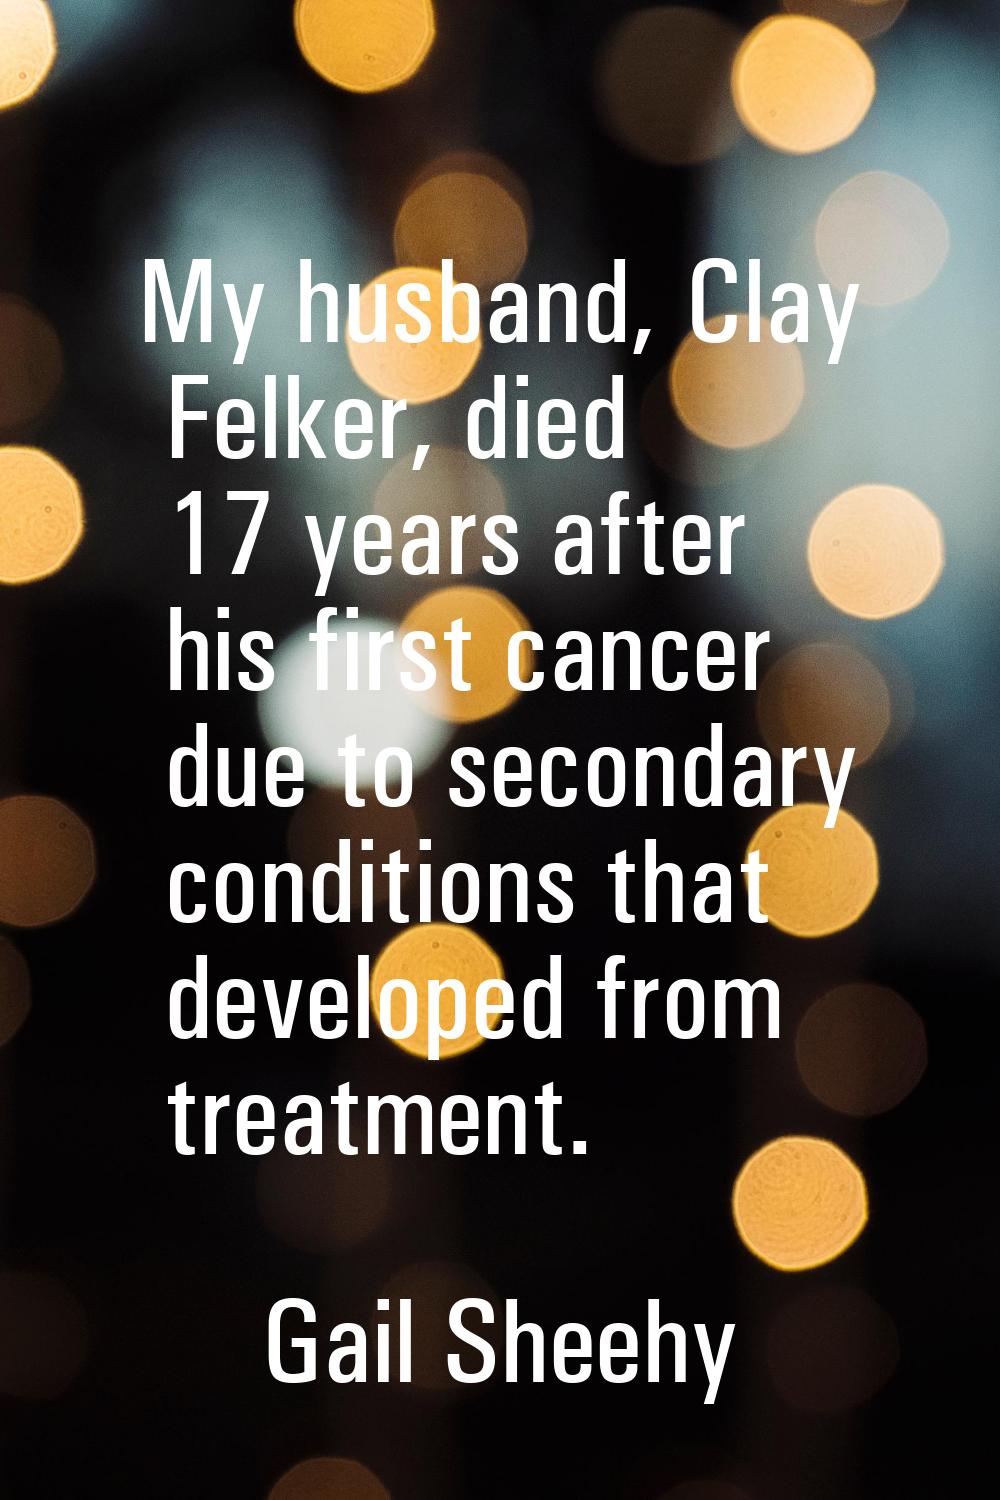 My husband, Clay Felker, died 17 years after his first cancer due to secondary conditions that deve